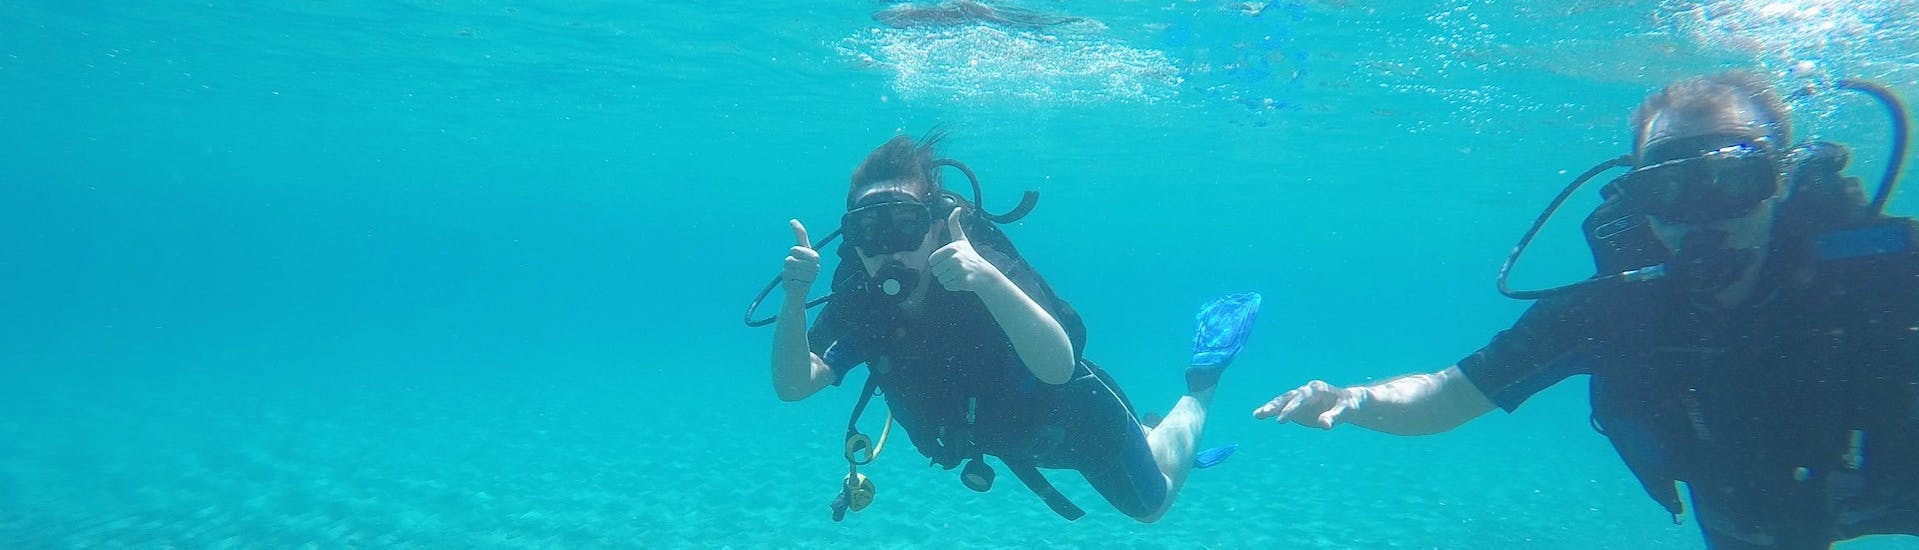 Girl poses for the camera during the discover scuba diving course hosted by St. Nicholas Beach Watersports.